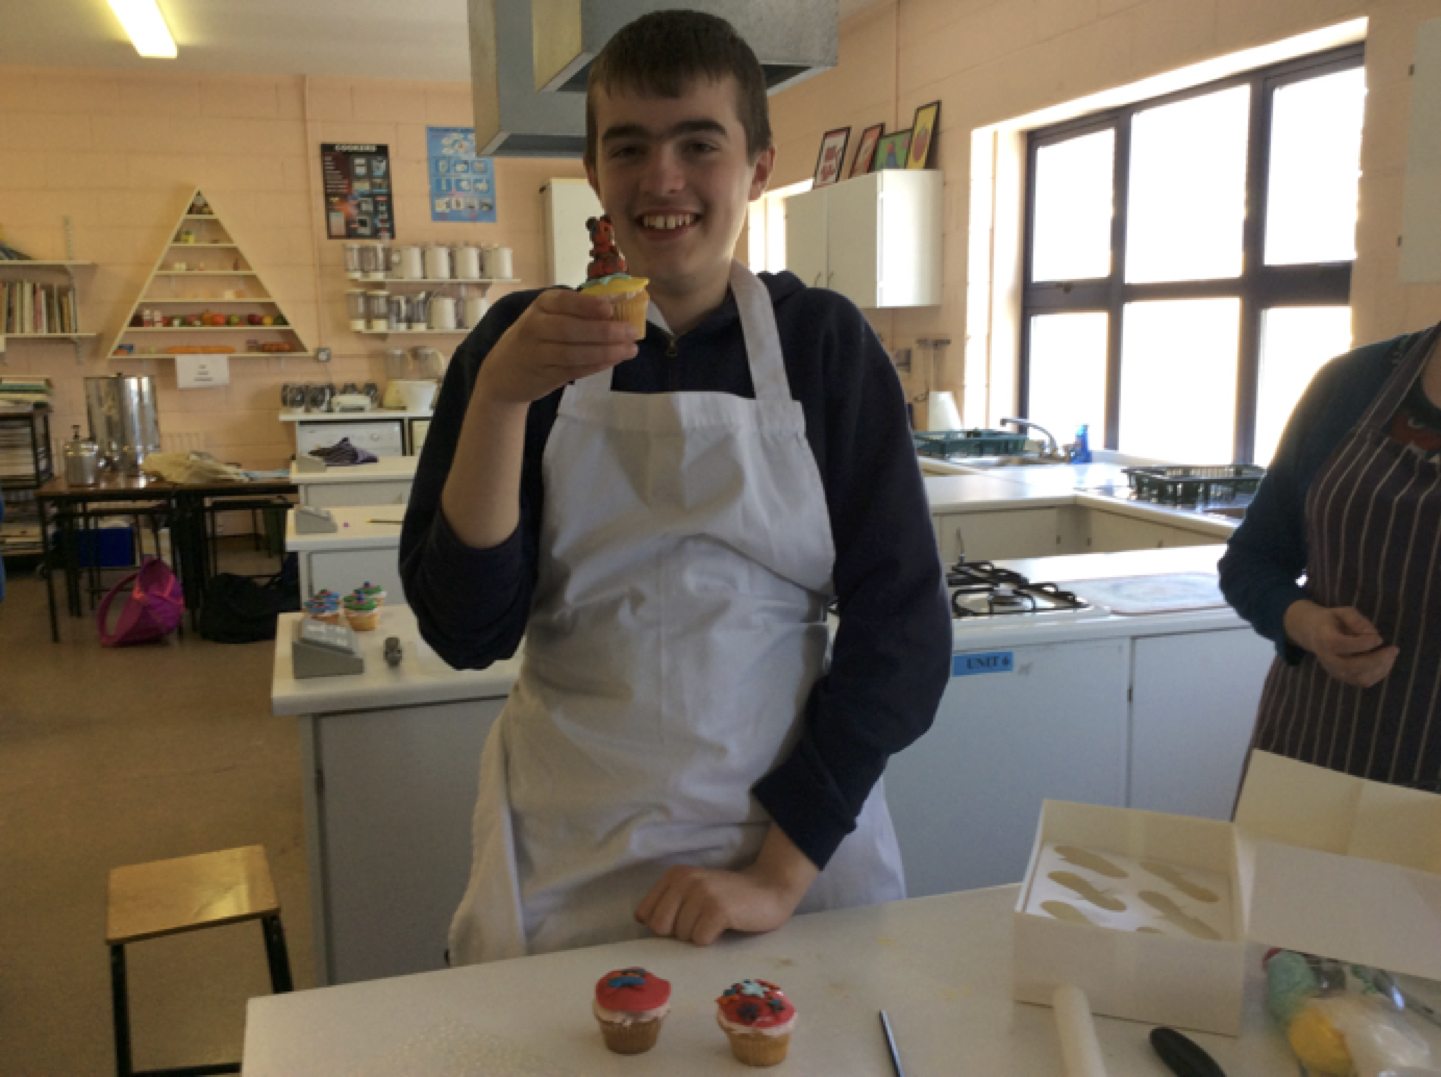 May 2017: Rang Fintan decorated cupcakes as part of the demonstration with Victoria from BakeYouSweet